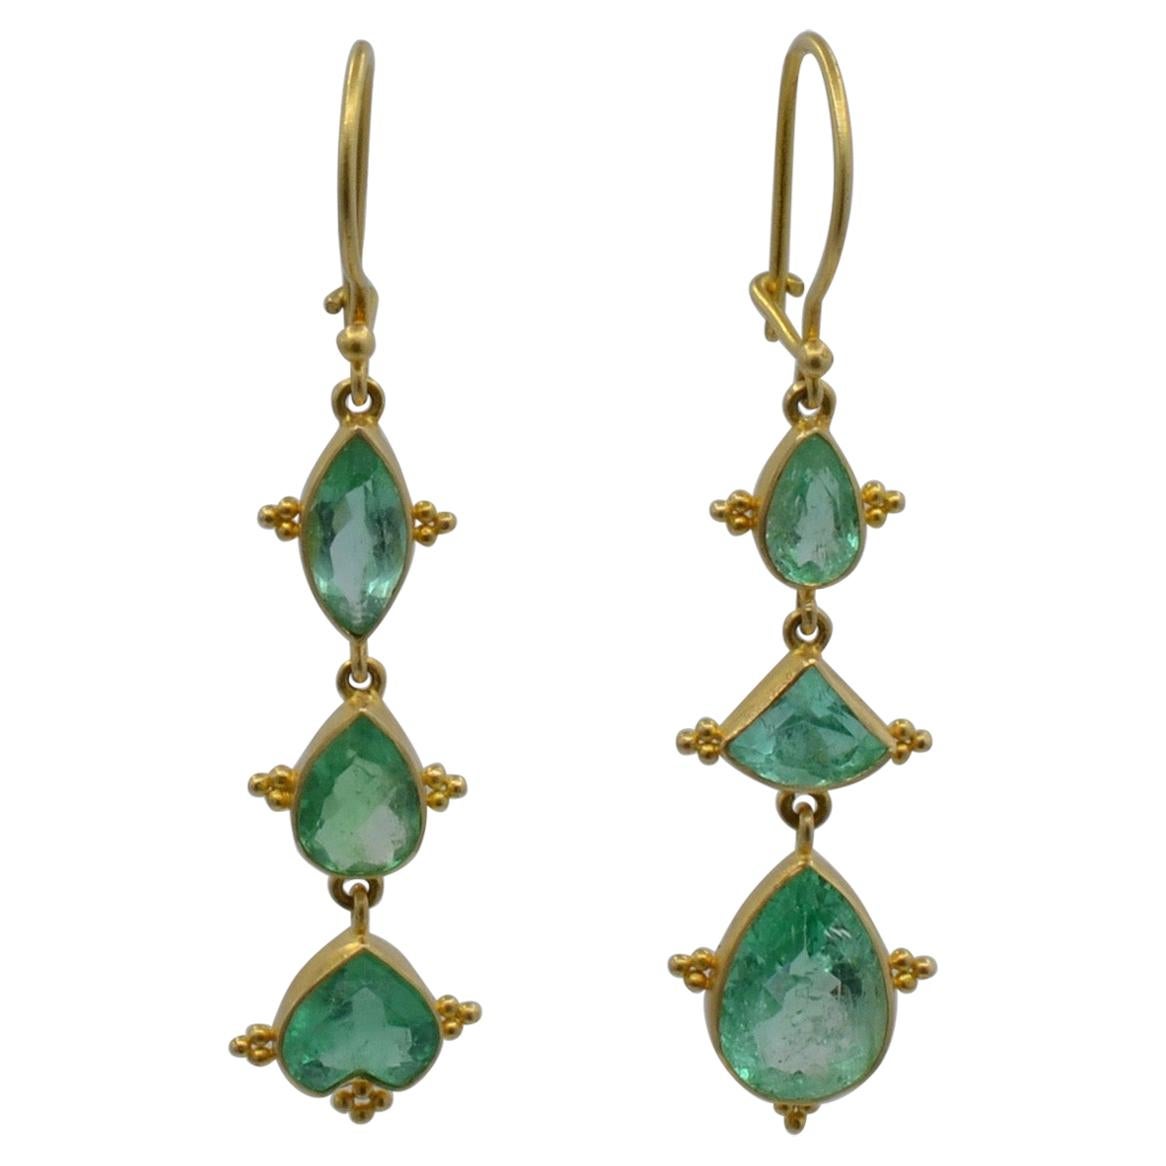 Emerald Earrings in Marquise and Pear Shapes Set in 18 Karat Yellow Gold